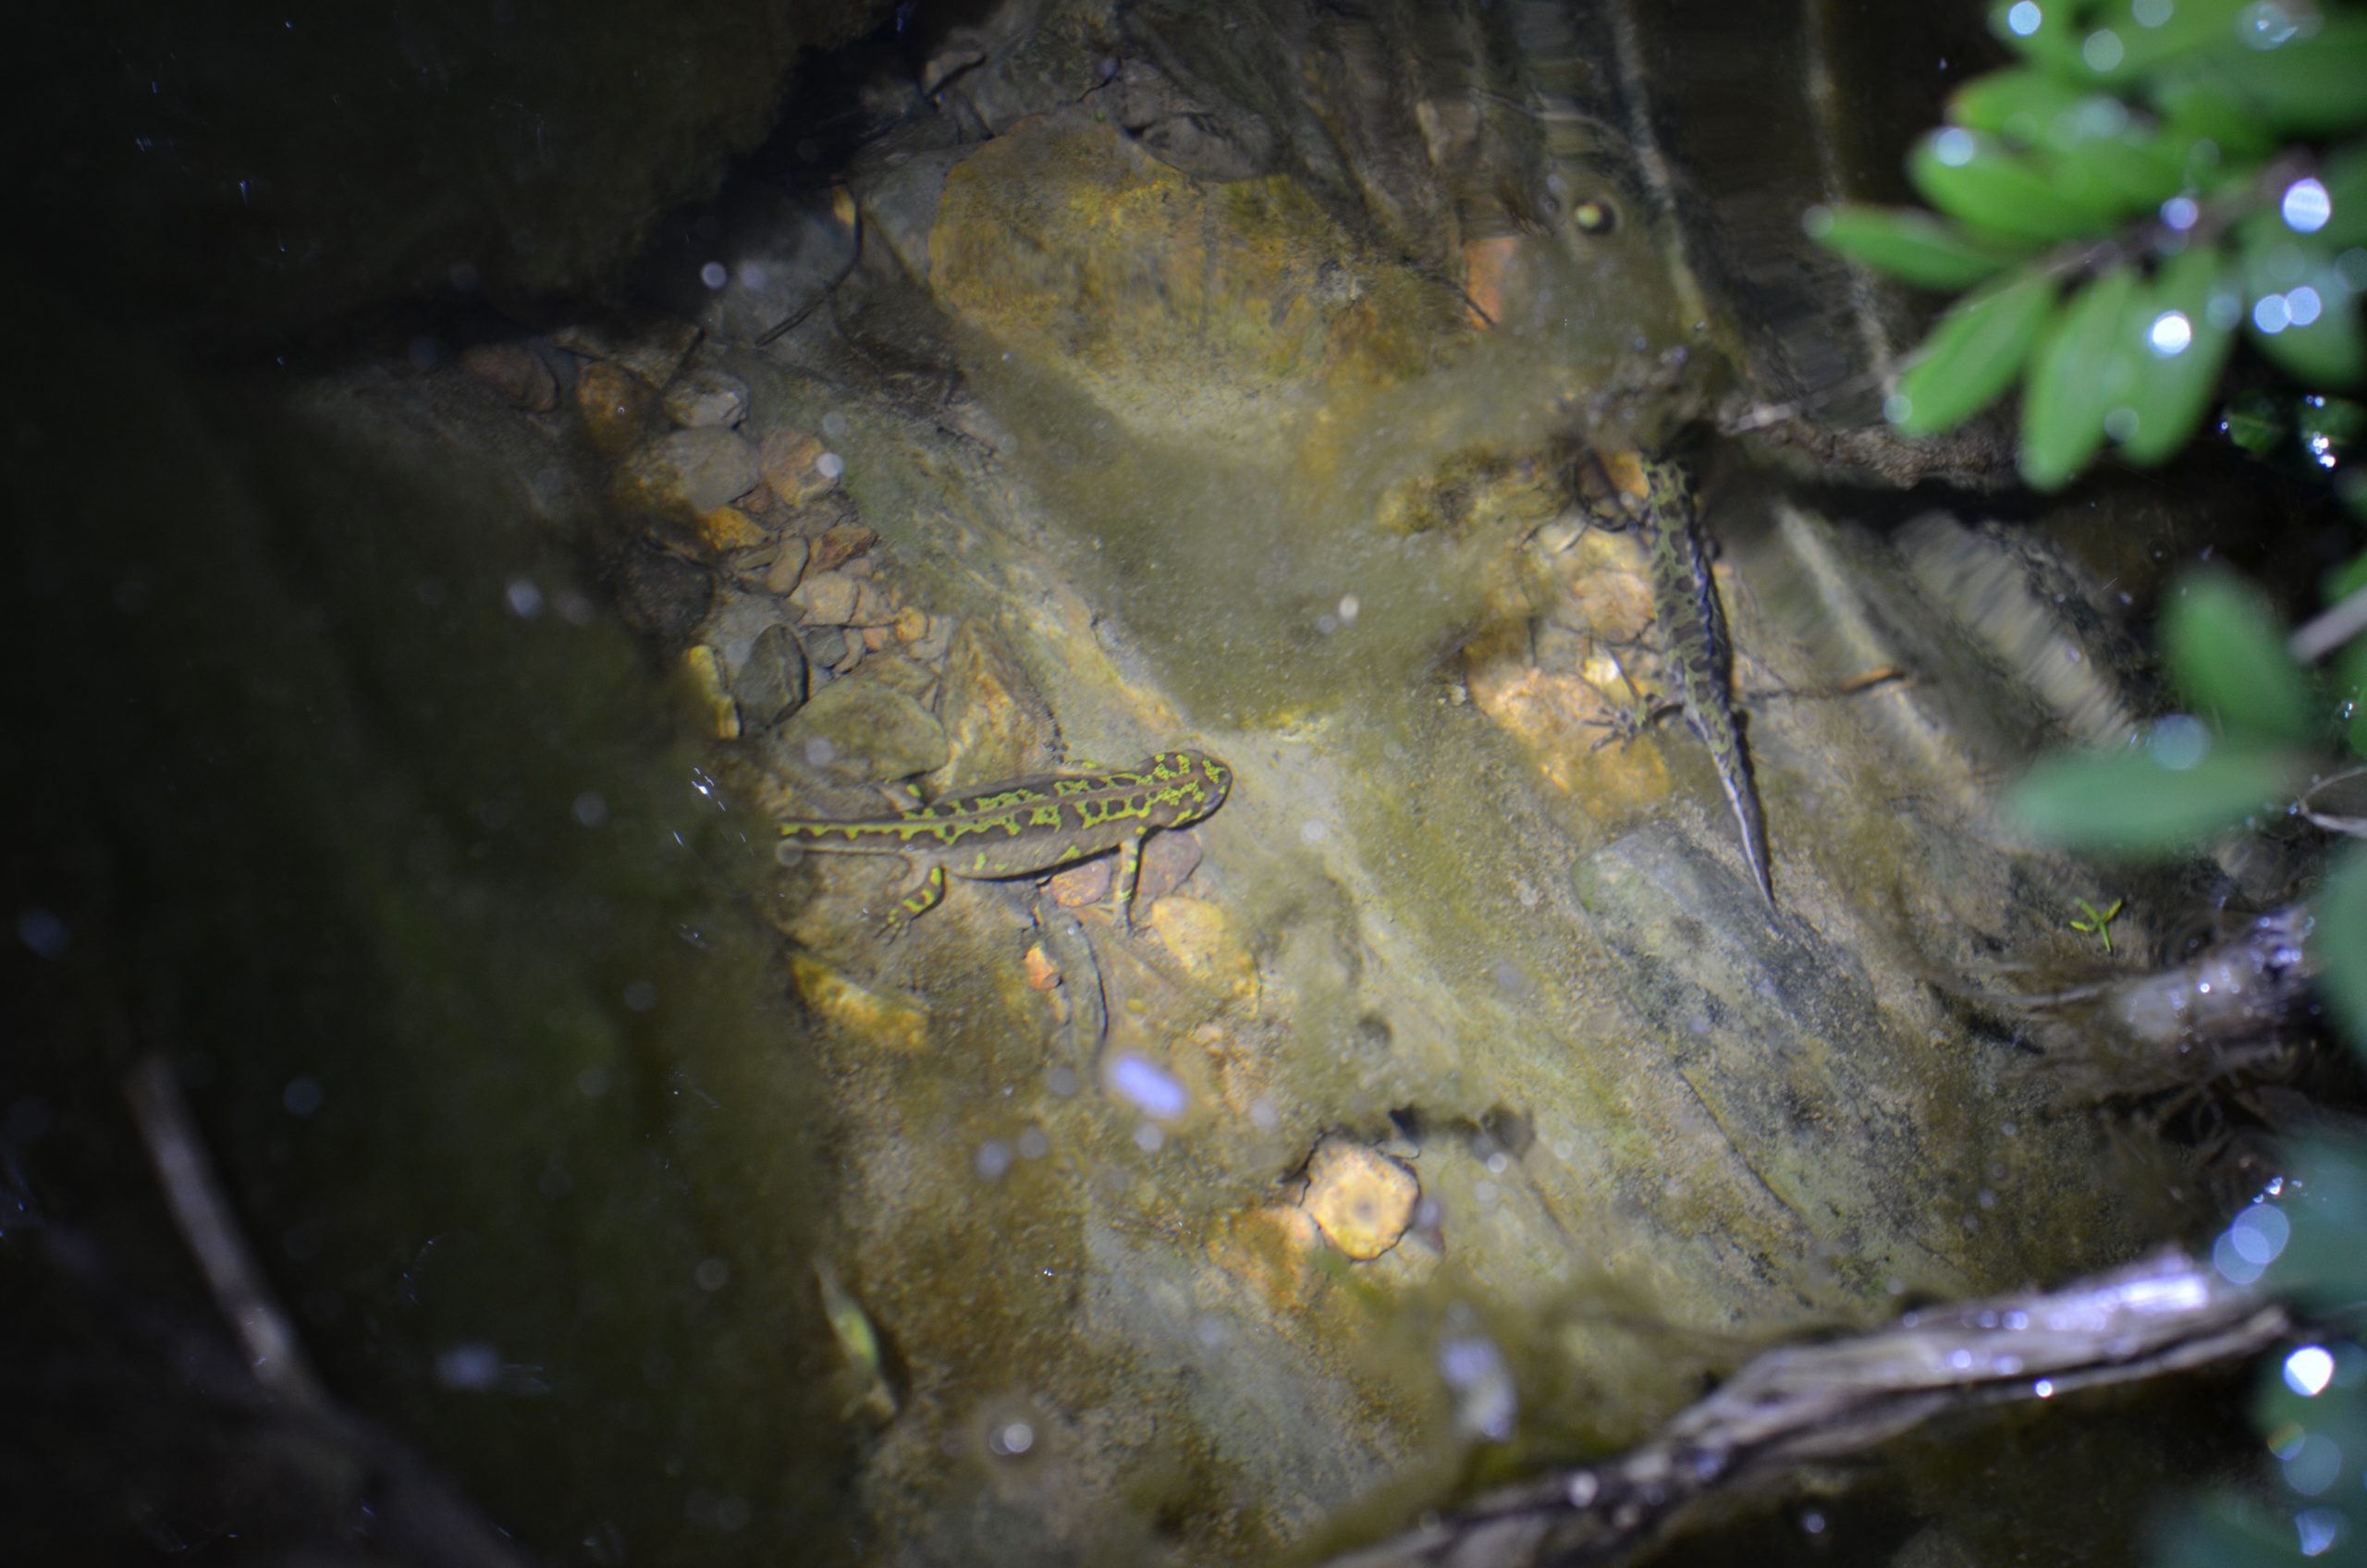 A pair of Pygmy Marbled Newts, female on the left watching a displaying male.